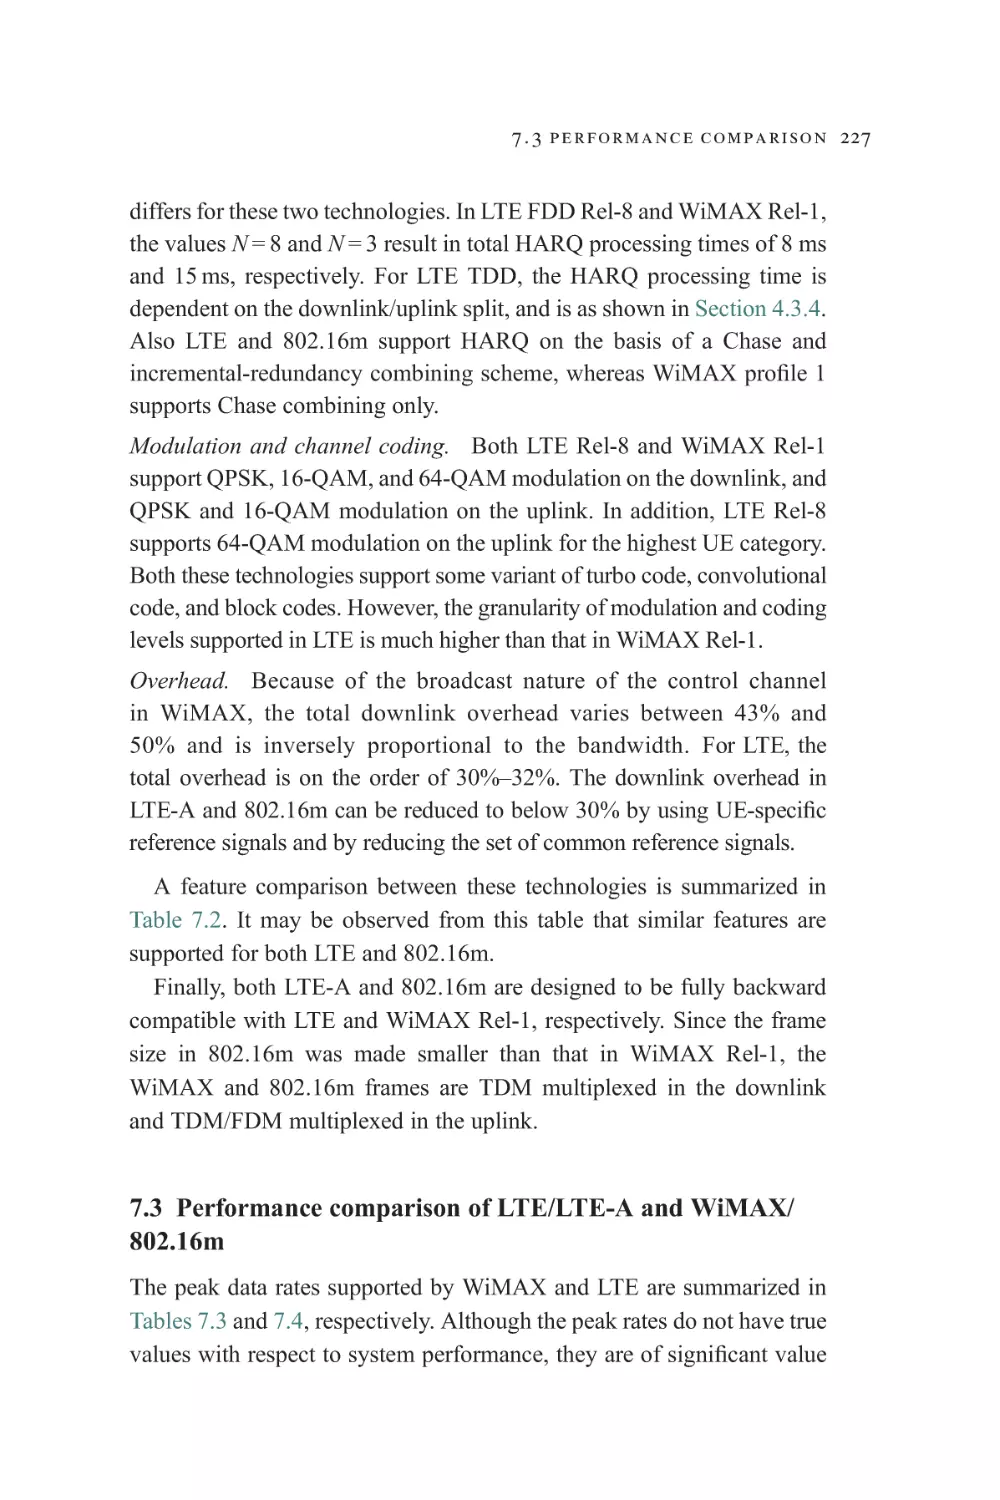 7.3 Performance comparison of LTE/LTE-A and WiMAX/802.16m